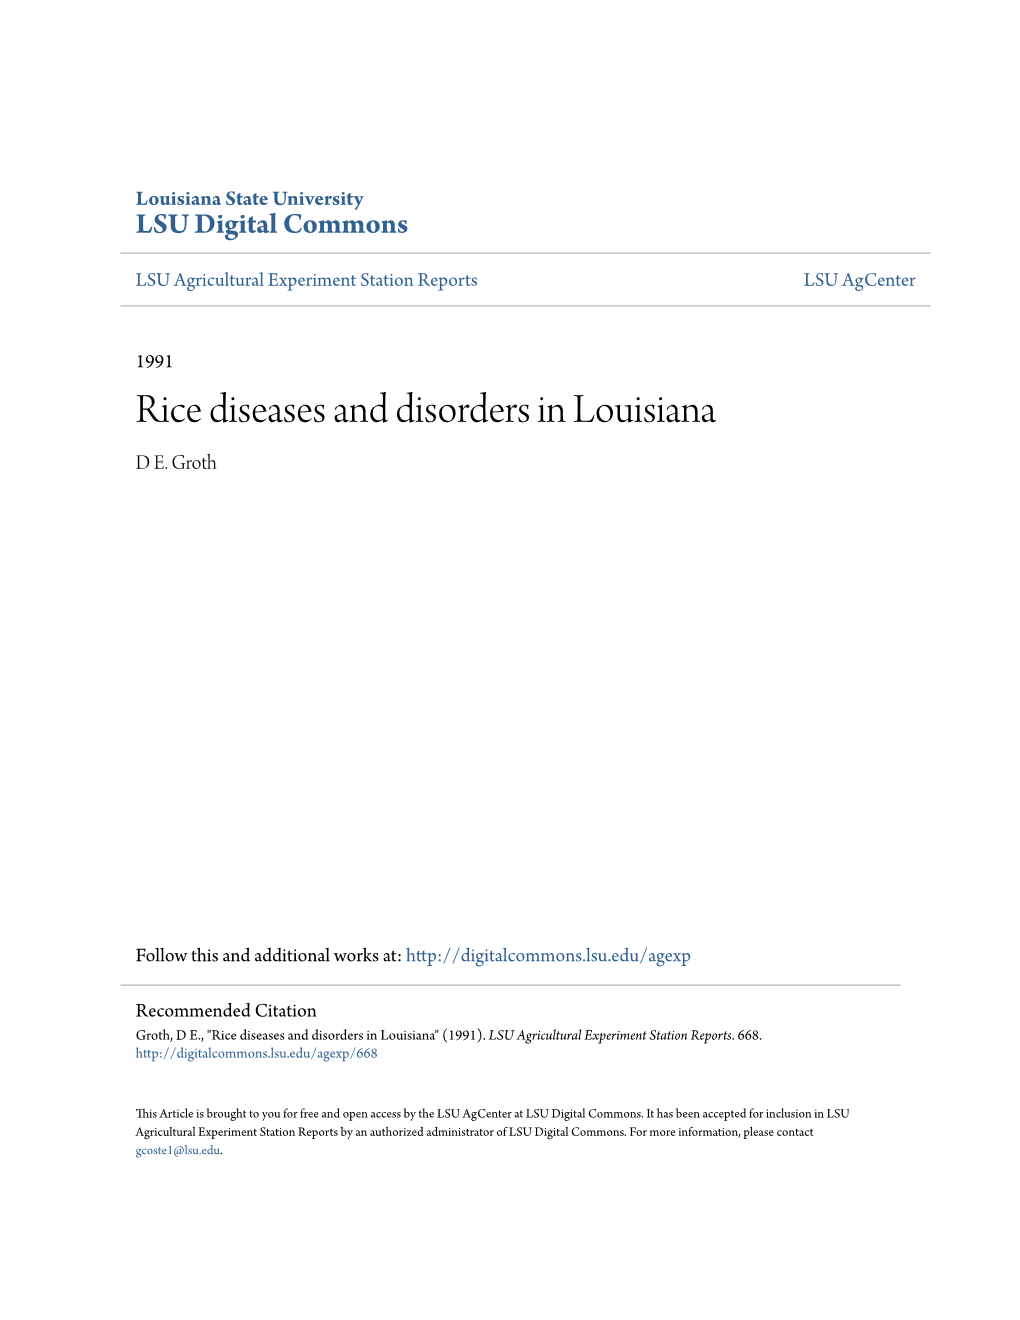 Rice Diseases and Disorders in Louisiana D E